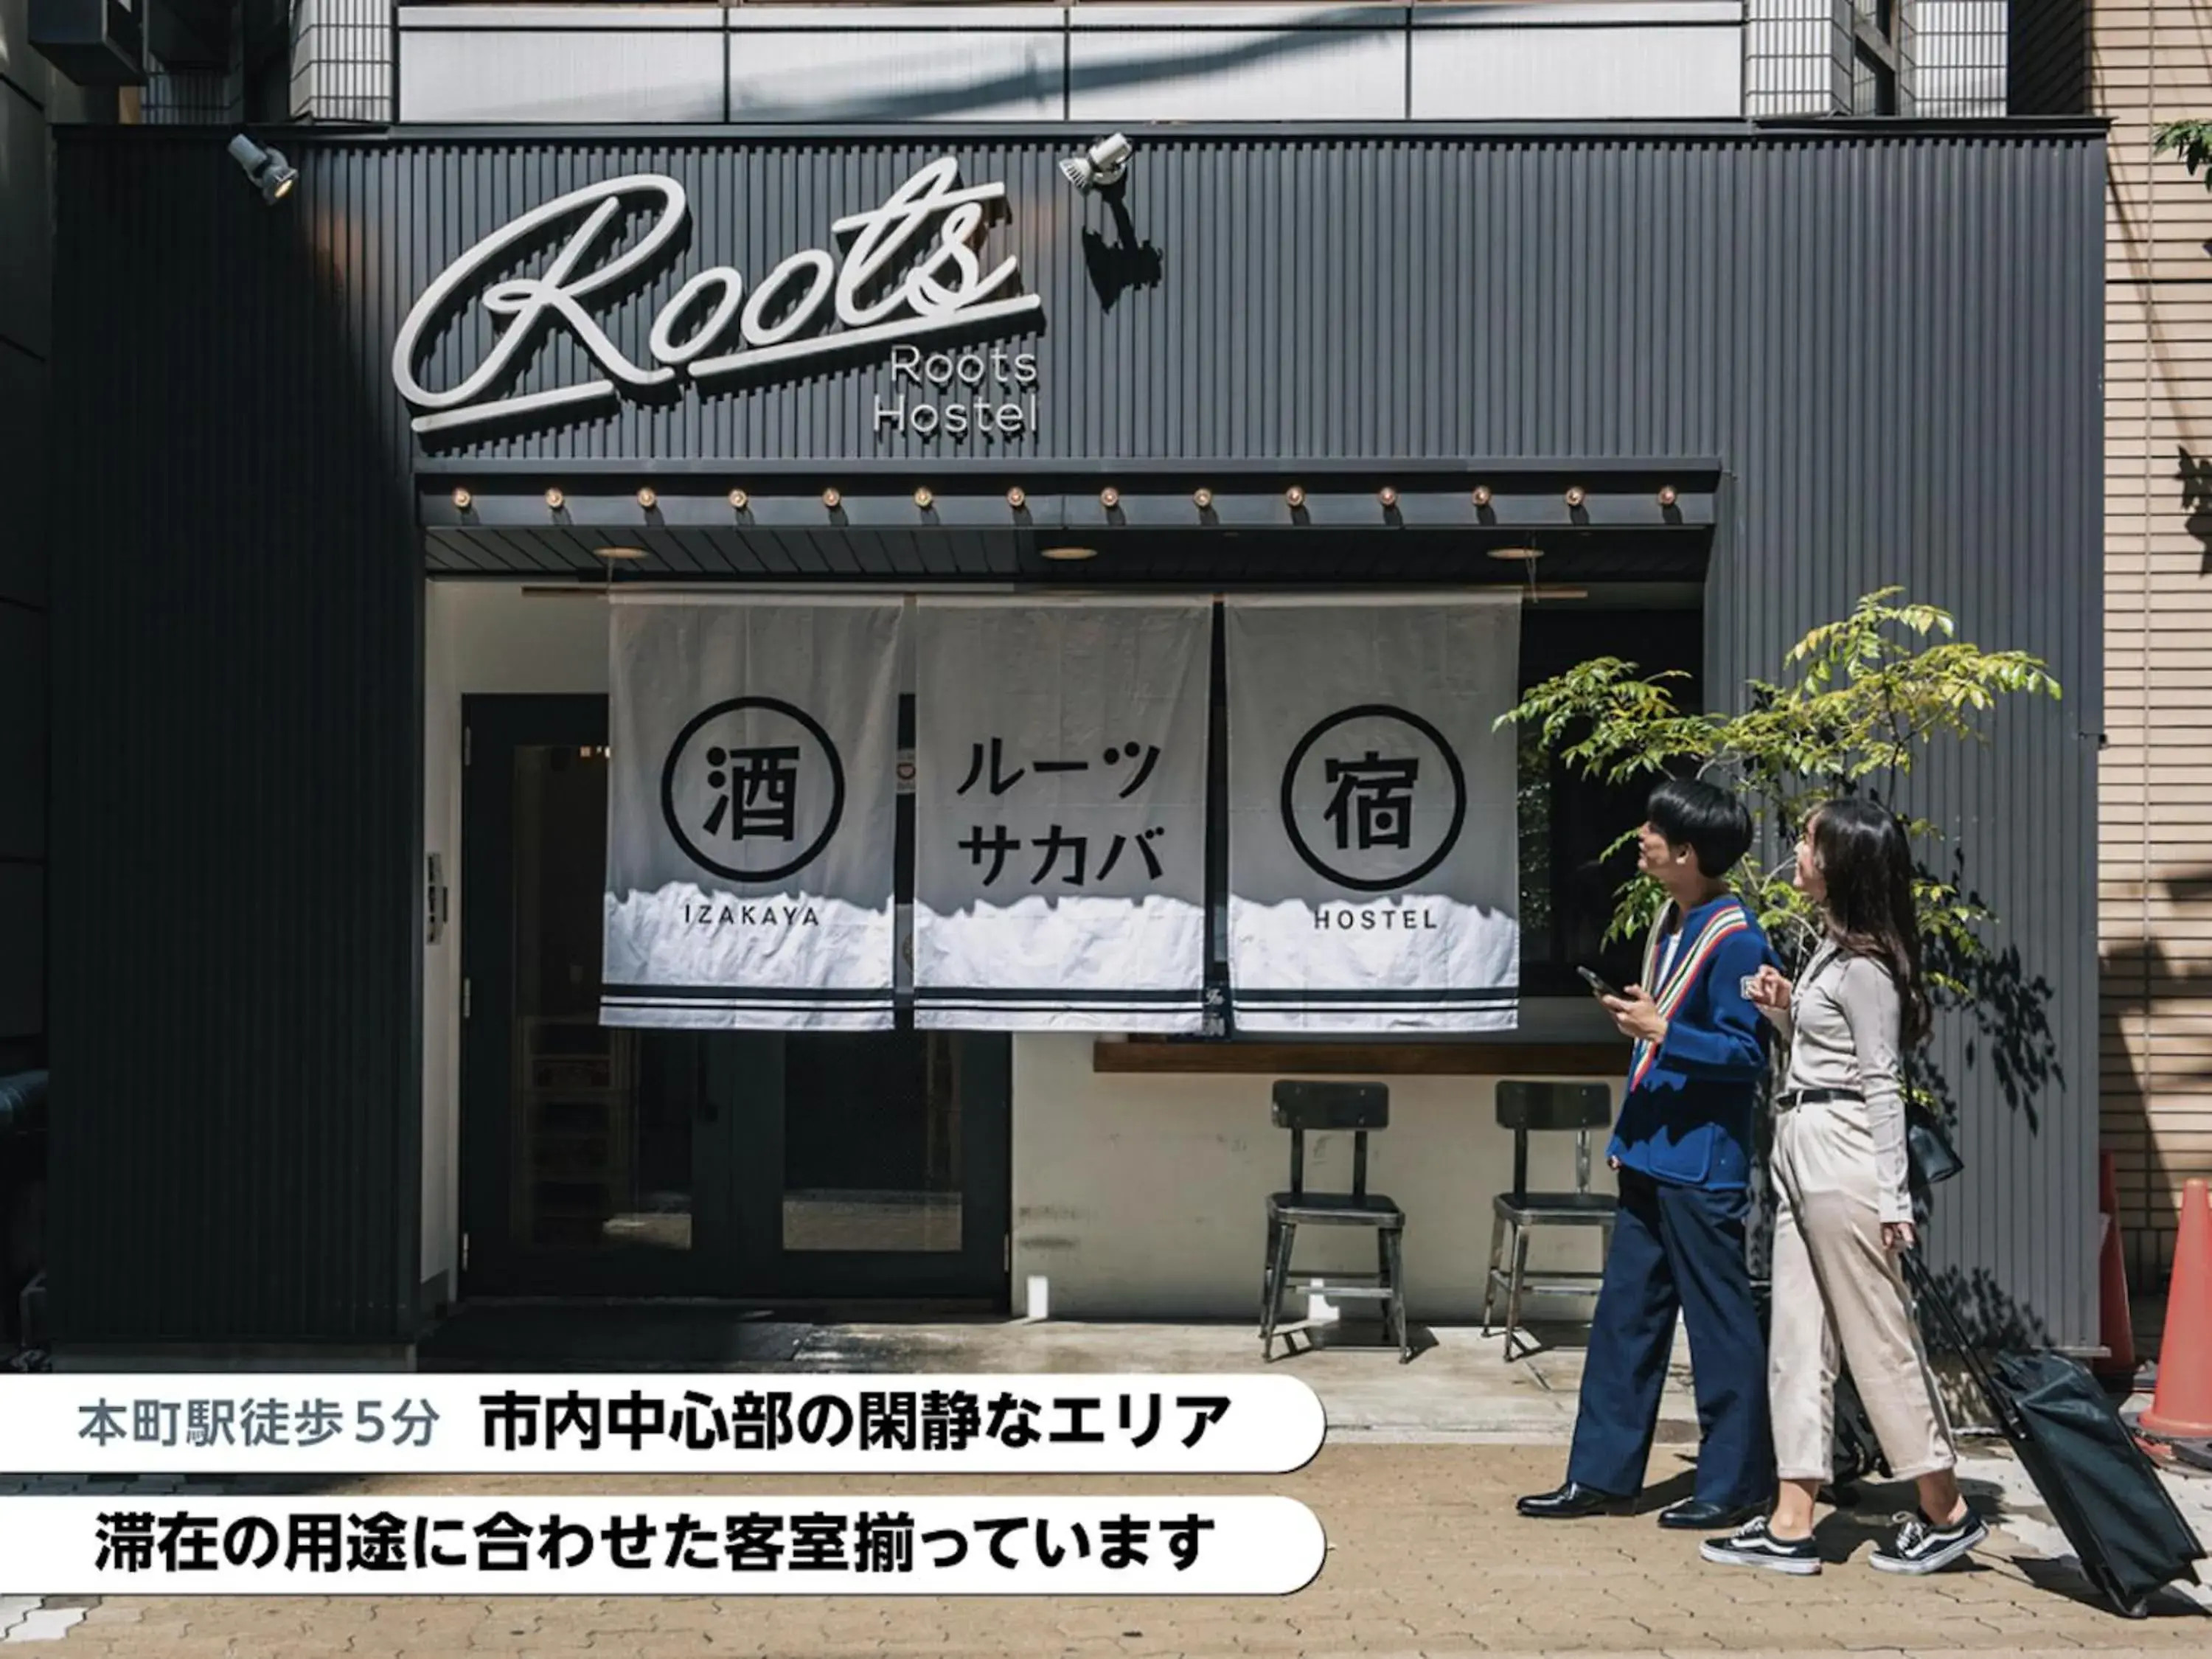 group of guests, Property Logo/Sign in Roots Hostel